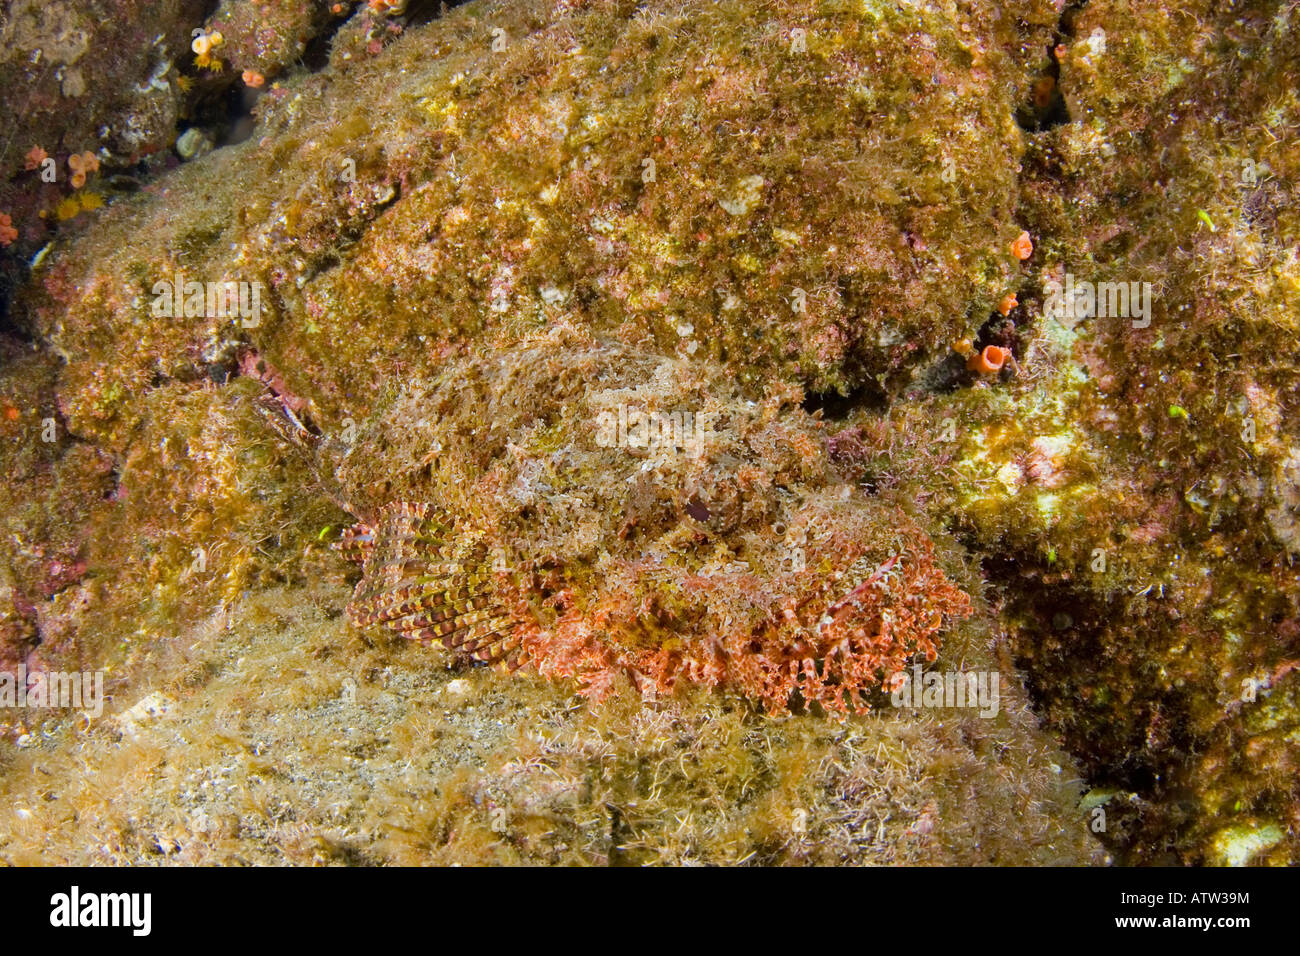 A camouflaged stone scorpionfish, Scorpaena plumieri mystes, hides on a reef in the Revillagigedos Islands, Mexico. Stock Photo